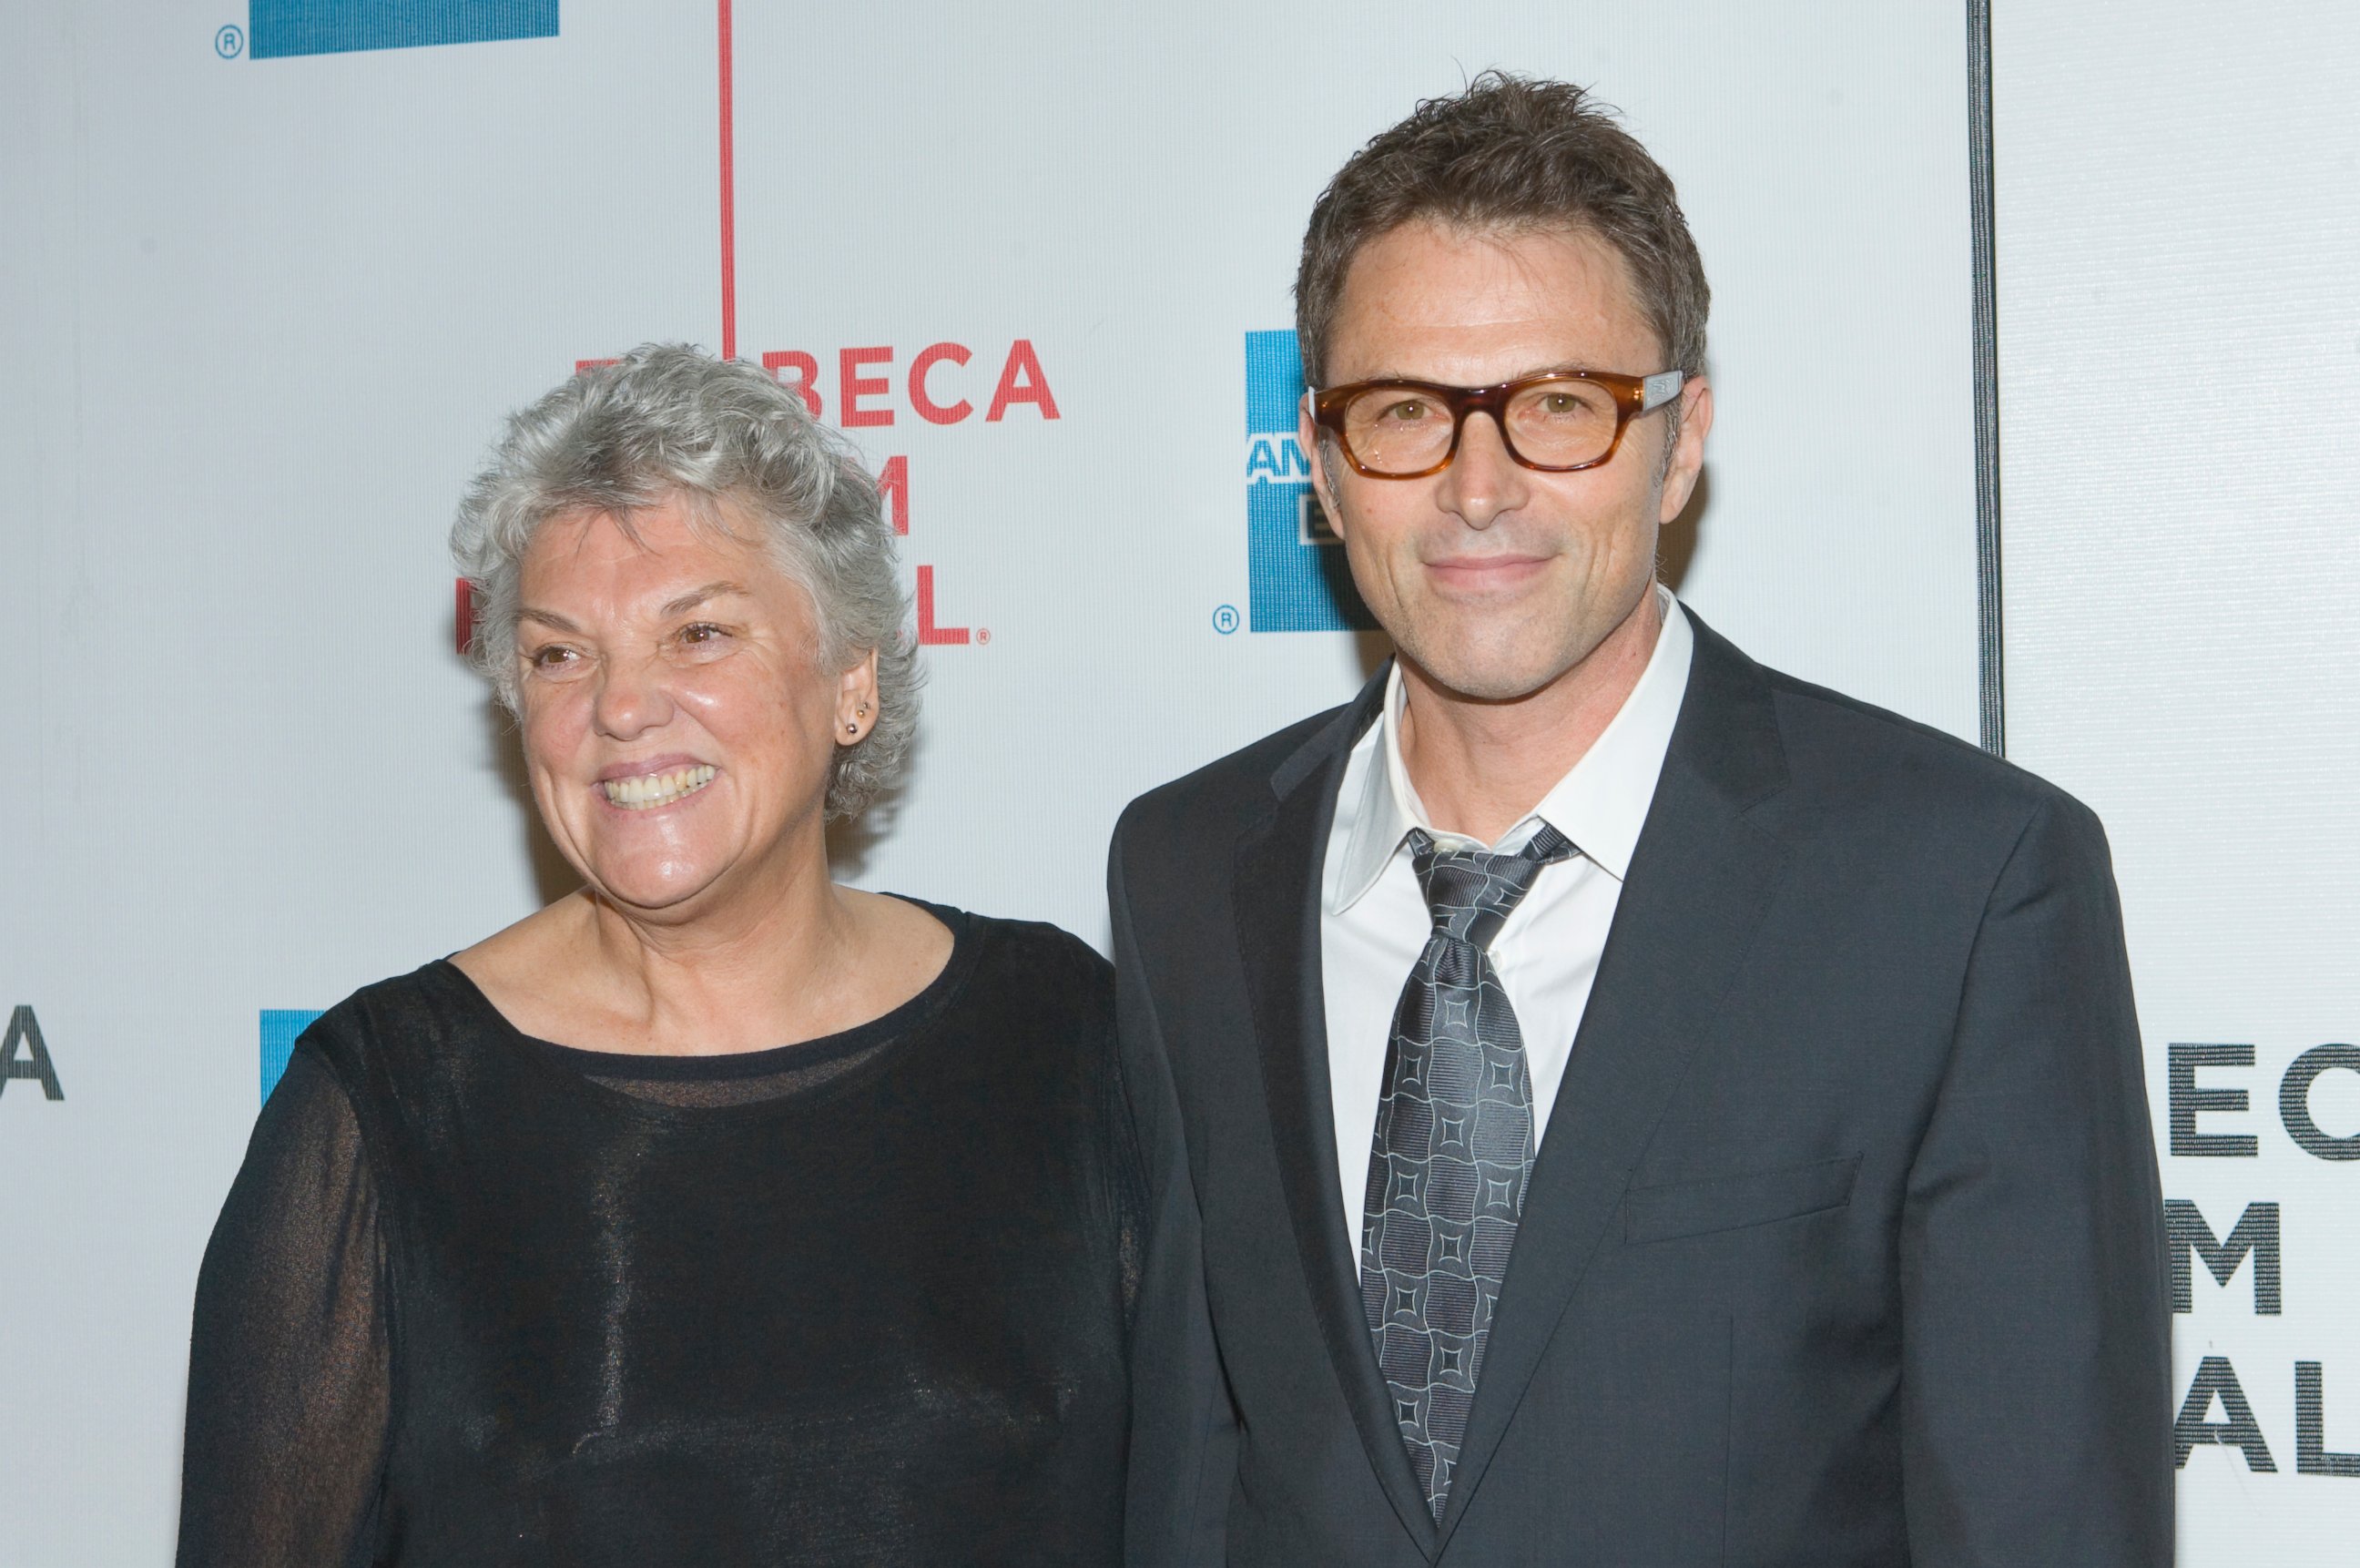 PHOTO: Tyne Daly and Tim Daly attend the "Poliwood Film Premiere" during the 8th Annual Tribeca Film Festival at the BMCC Tribeca PAC in New York City, May 01, 2009.